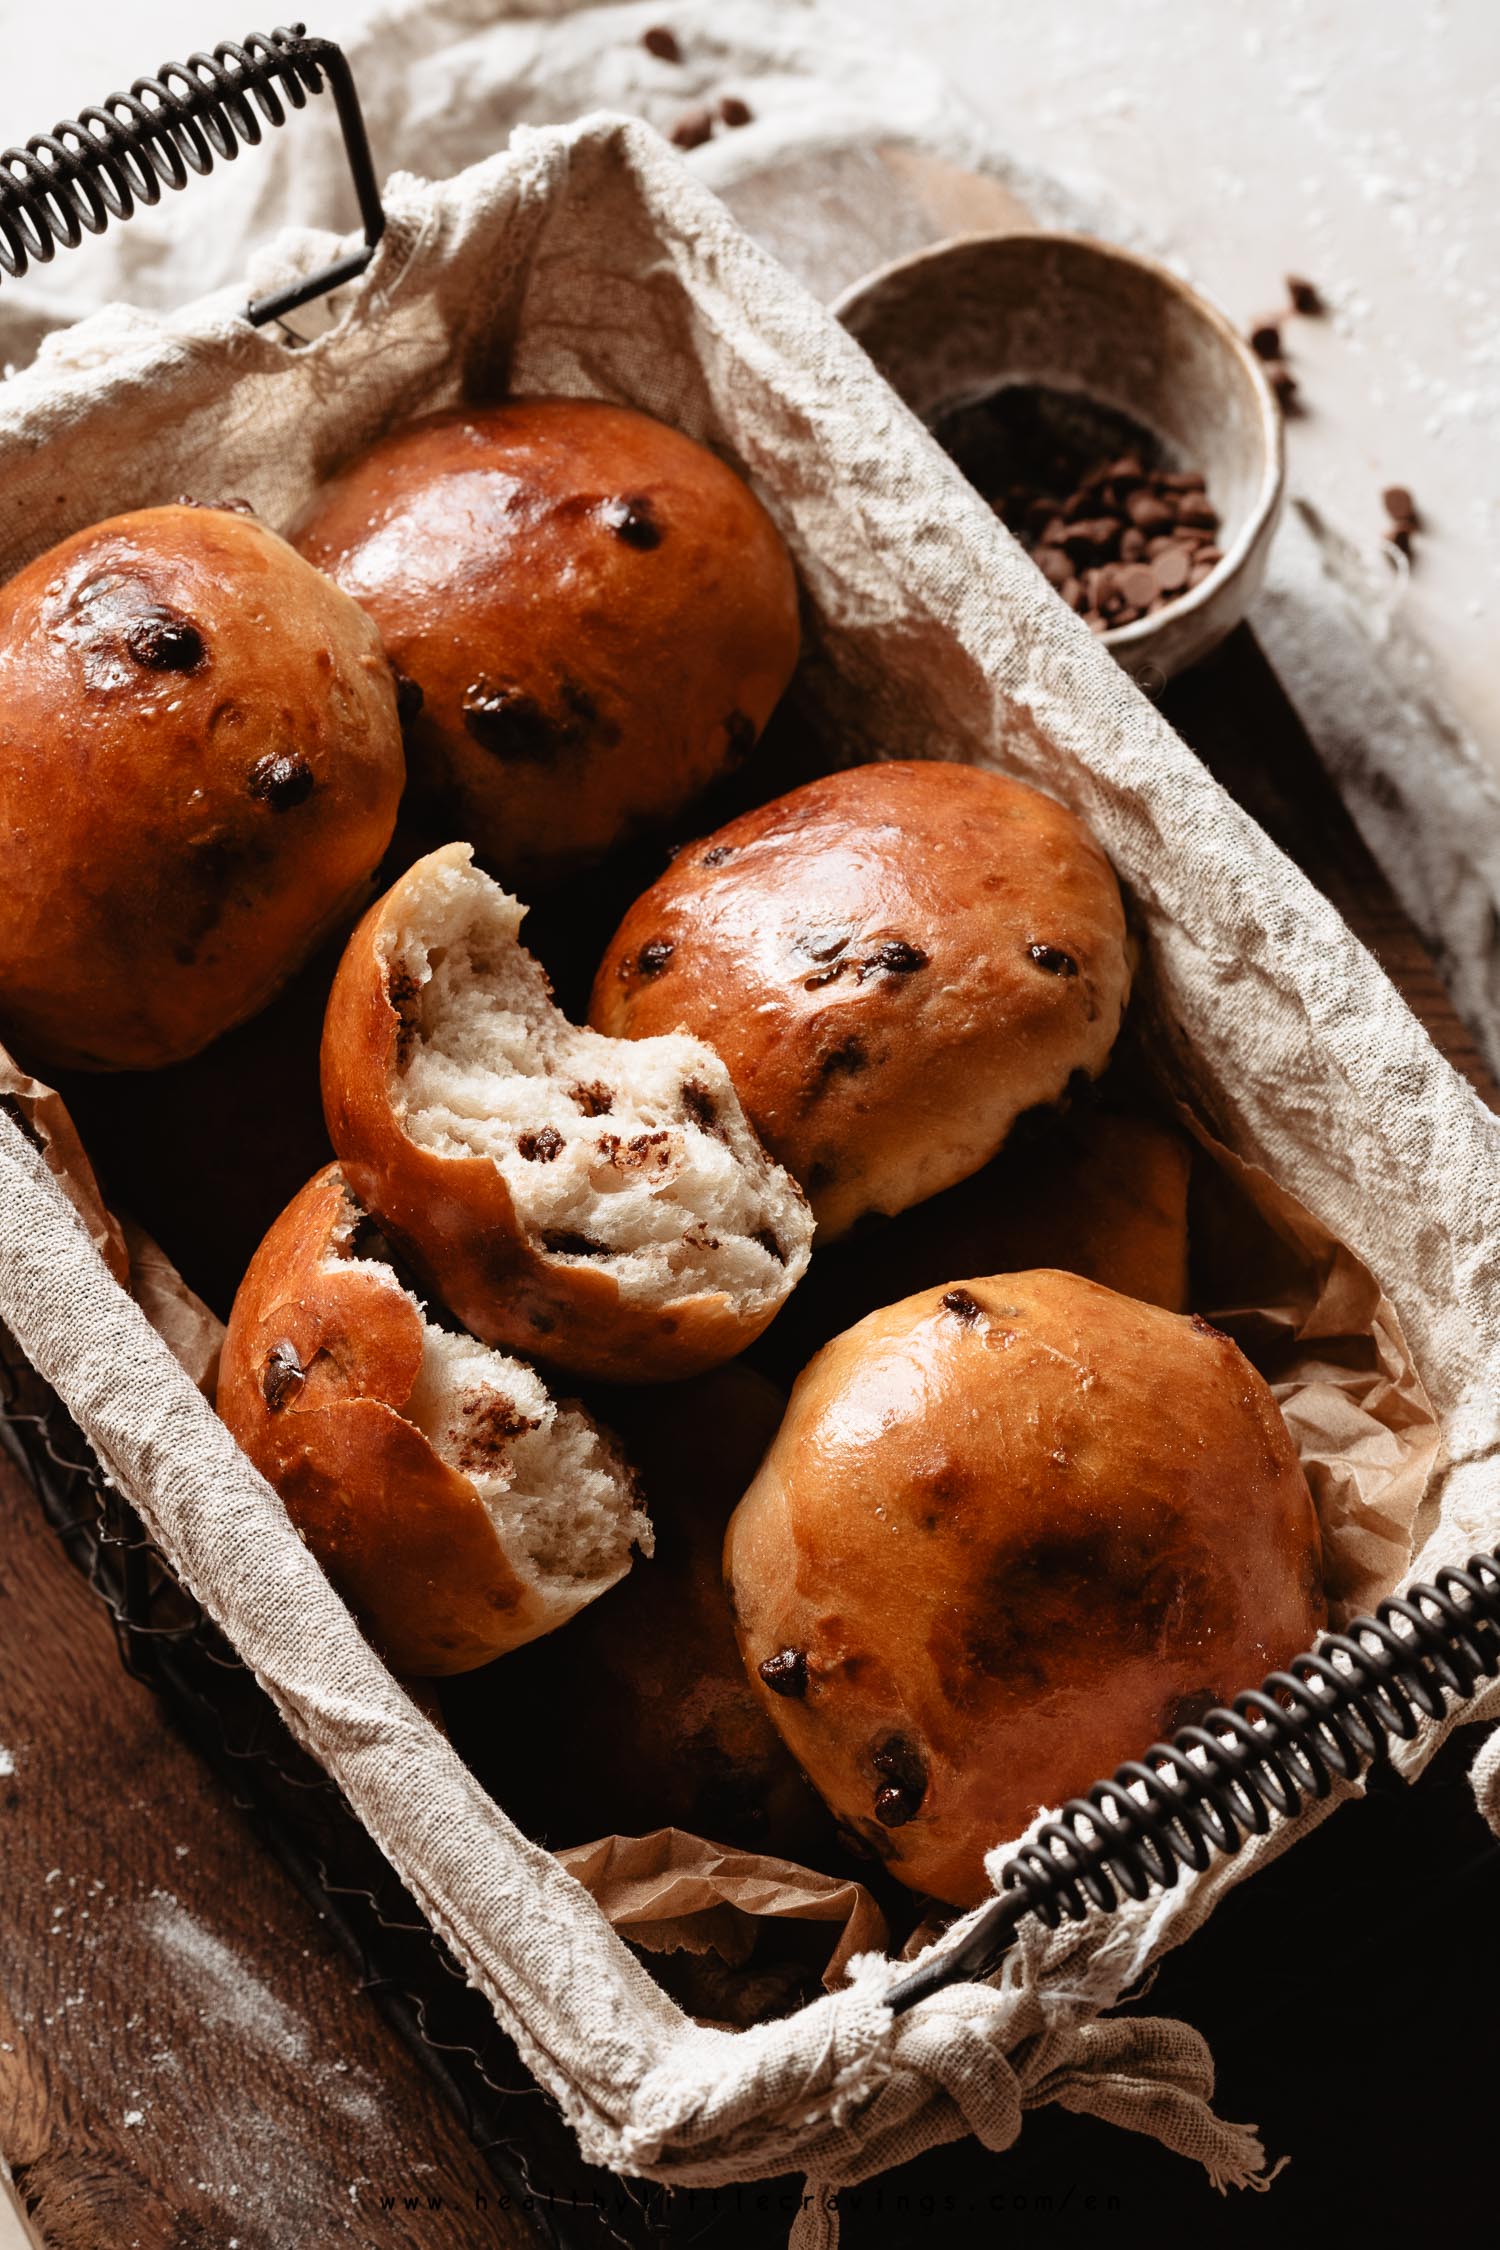 Chocolate chips milk buns in a basket